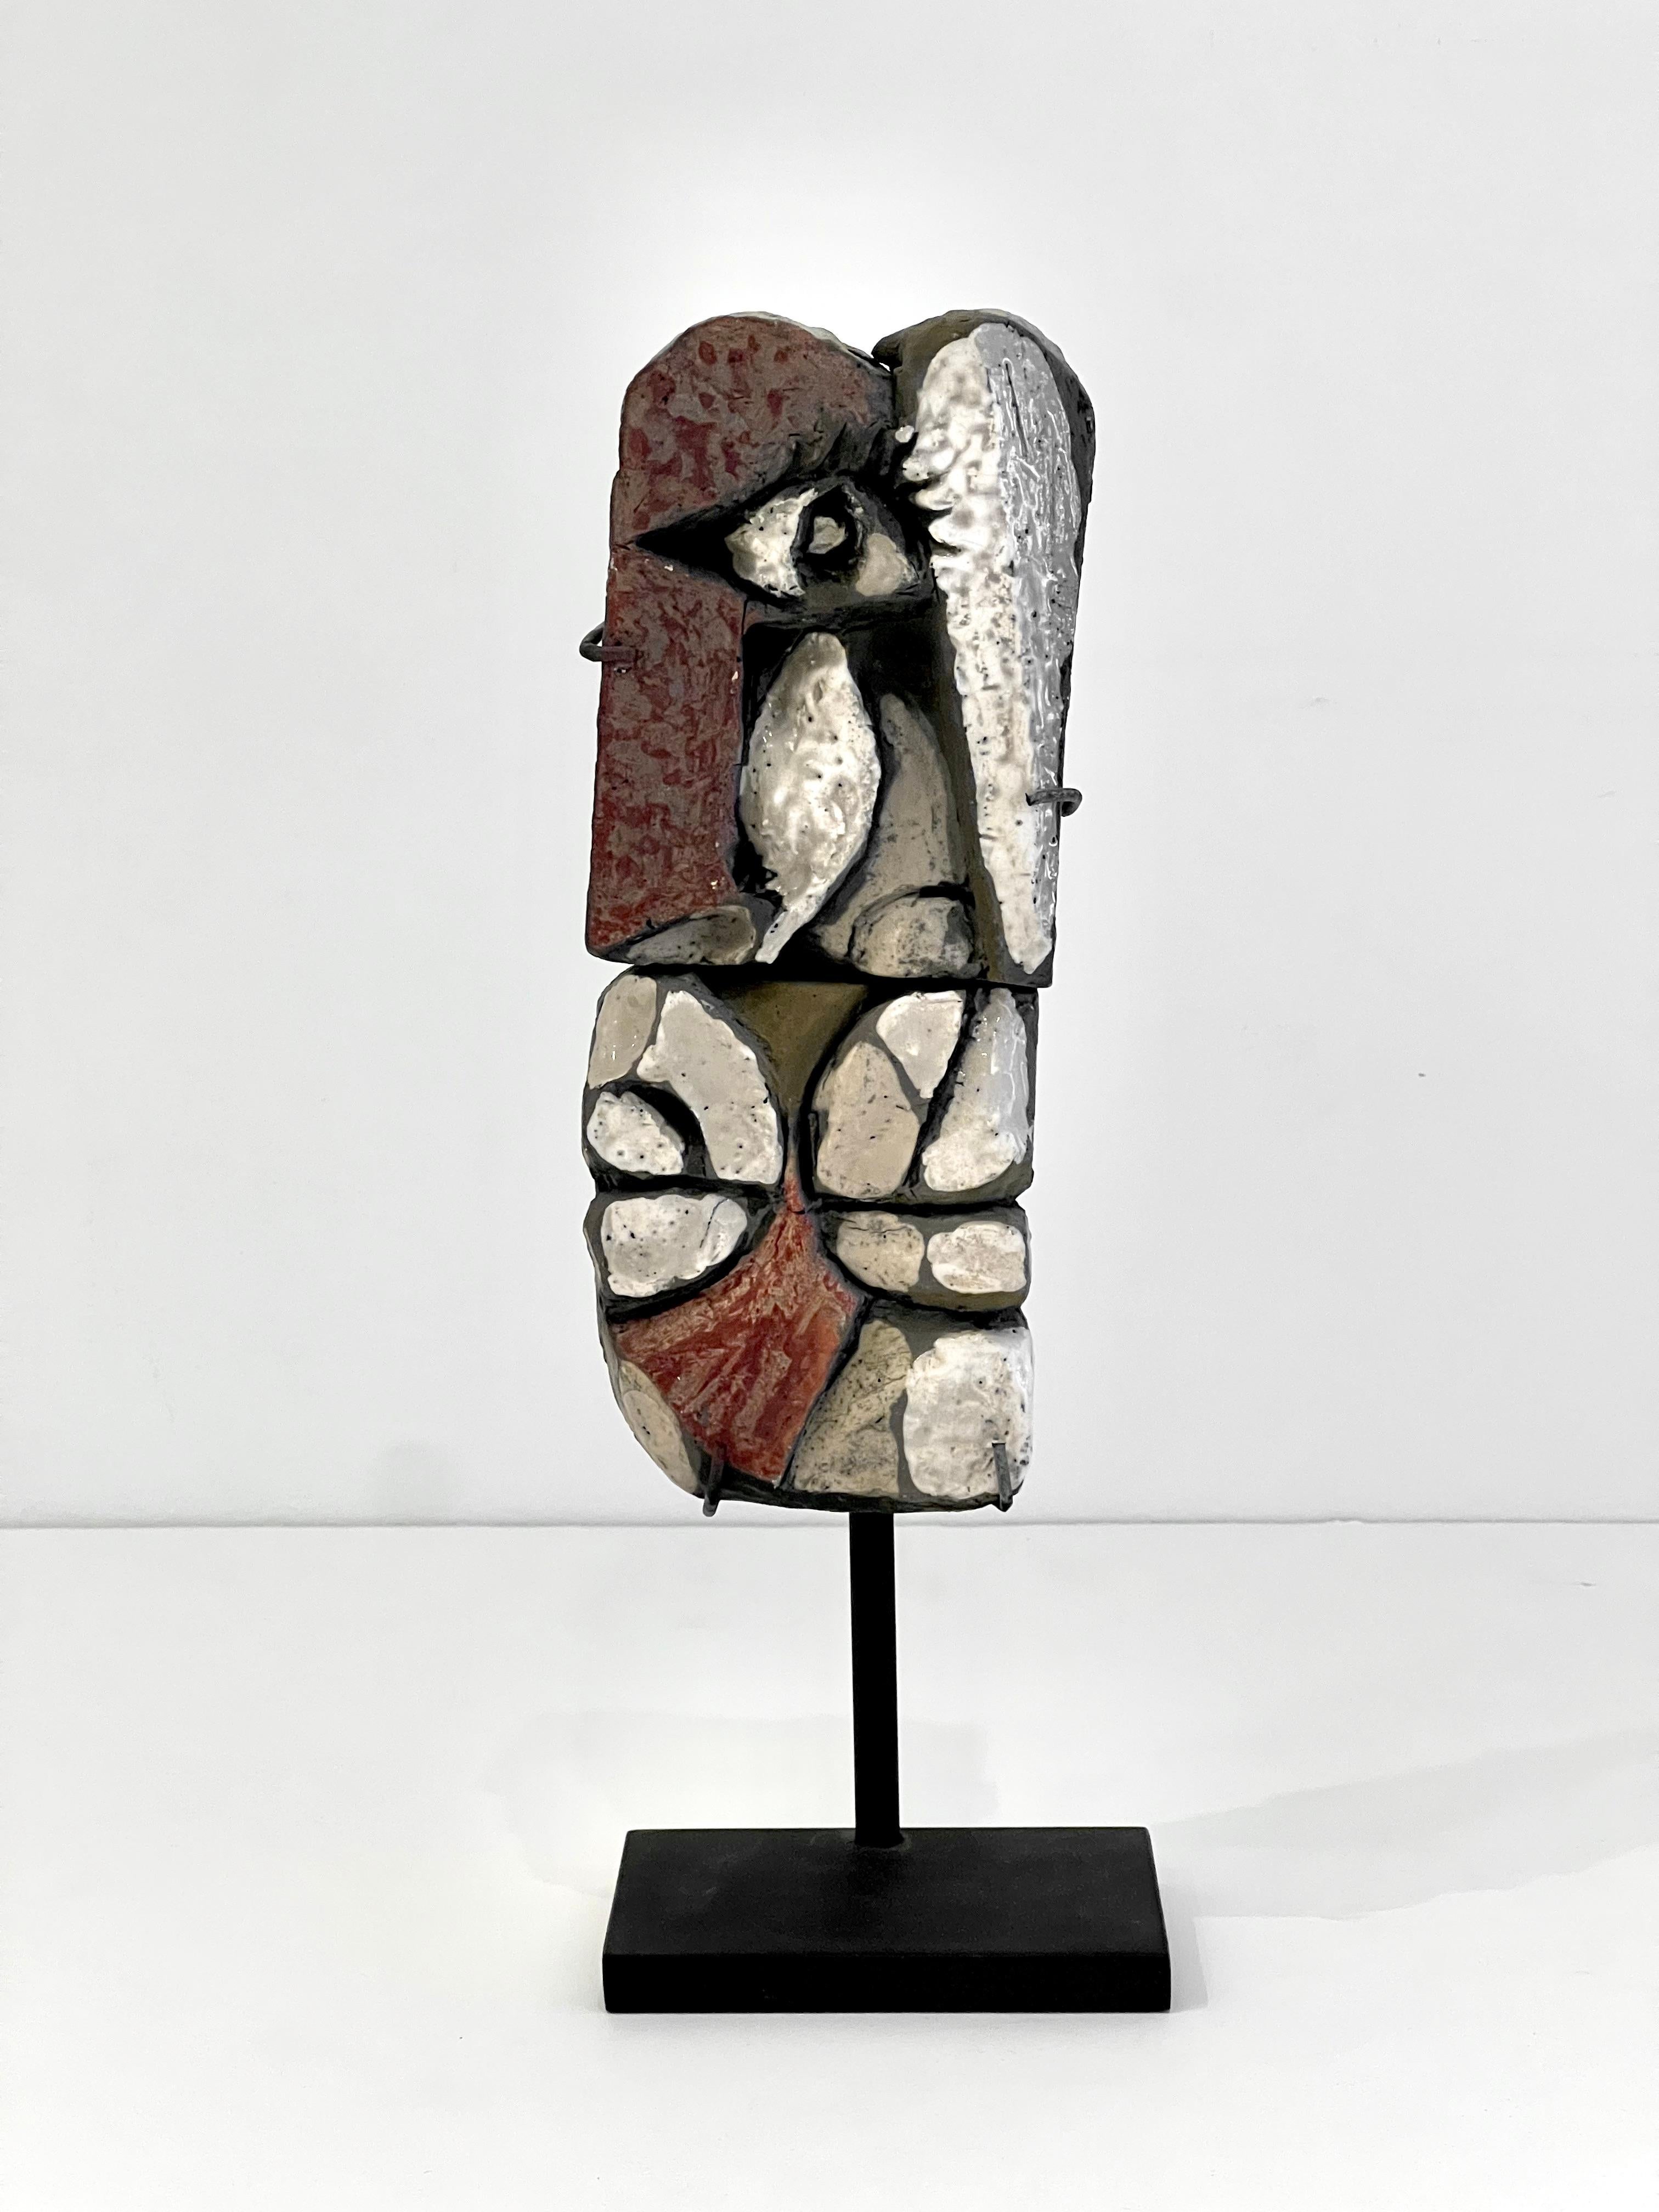 Abstract Ceramic Figural Sculpture by Roger Capron, France, 1970s.
Although he is primarily known for his tables, Roger Capron went on to create amazing sculptures later in his life.